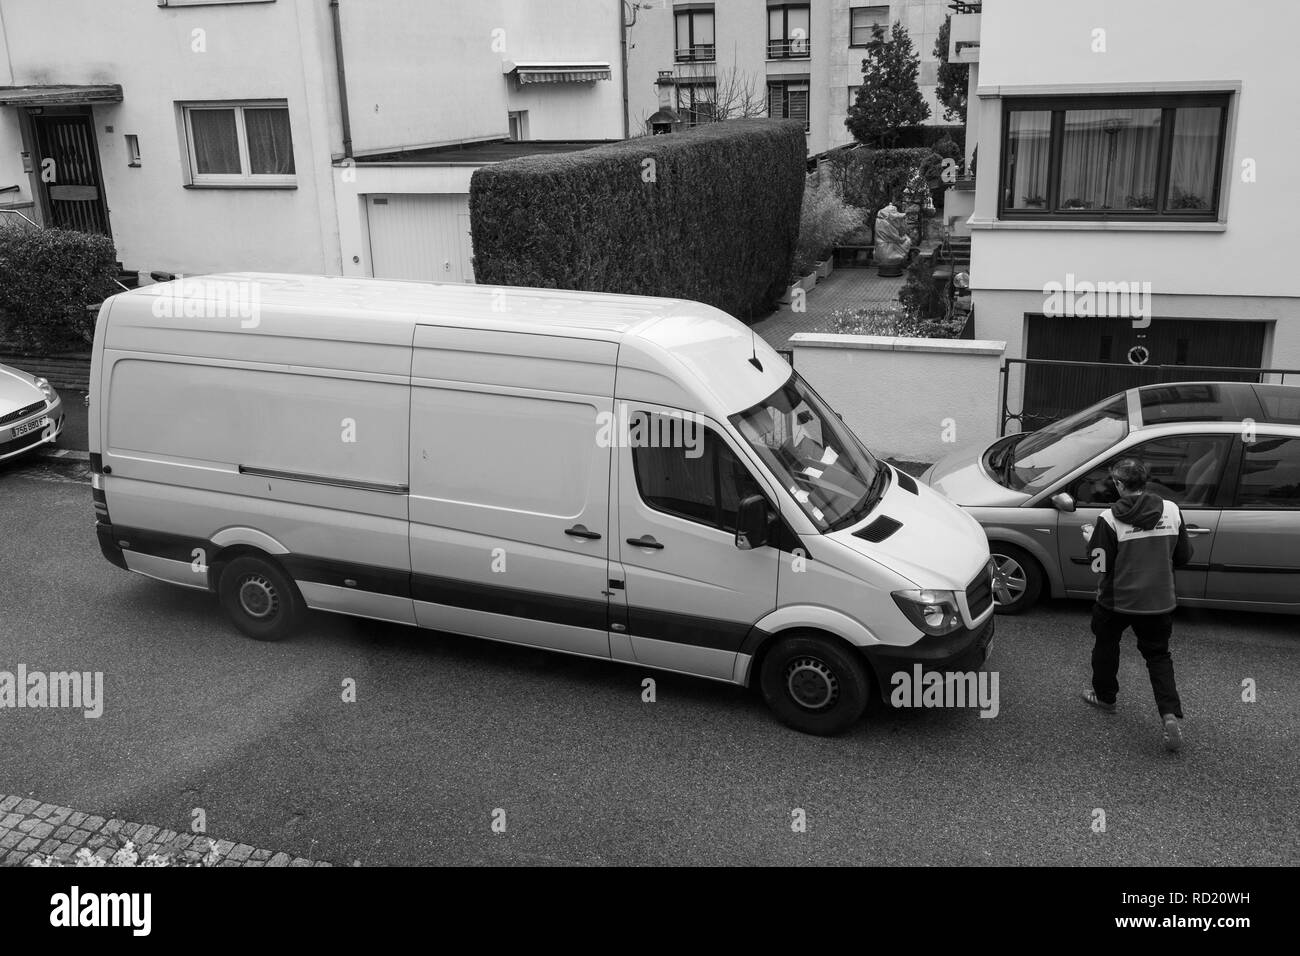 PARIS, FRANCE - MAR 30, 2018: Courier enters DHL yellow delivery van after delivering the on time delivering package parcel in typical European neighborhood - elevated view  Stock Photo